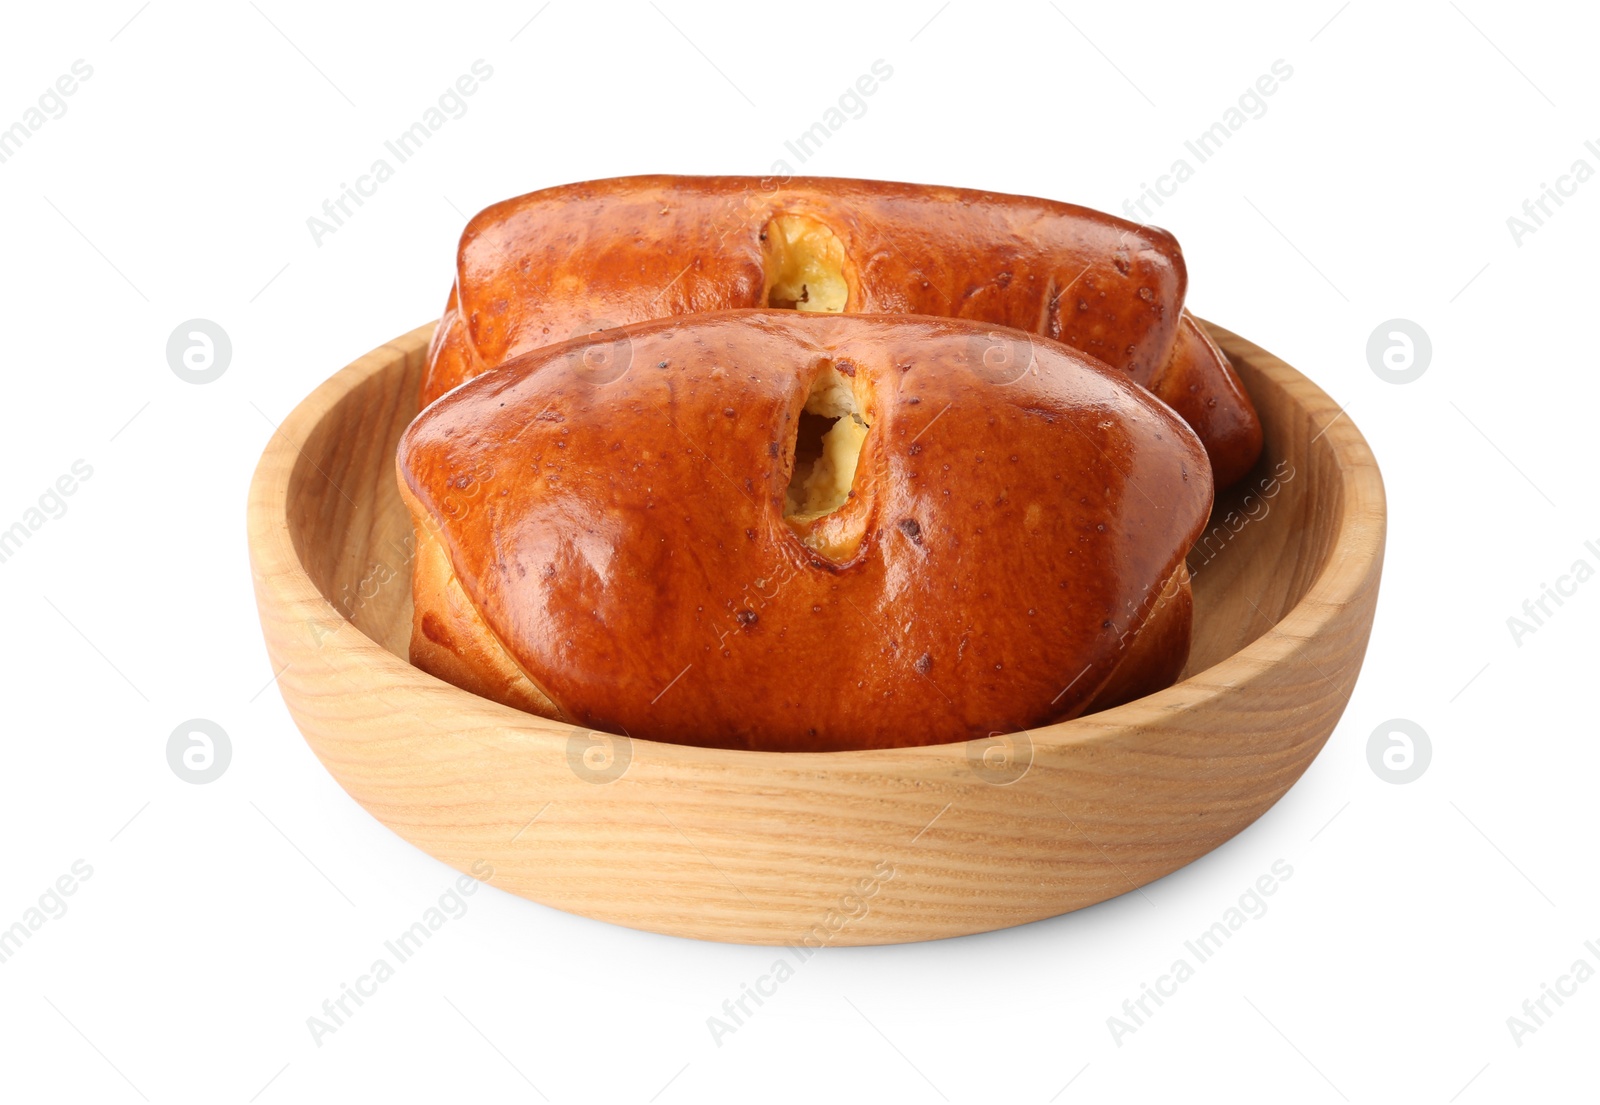 Photo of Wooden bowl with delicious baked patties on white background